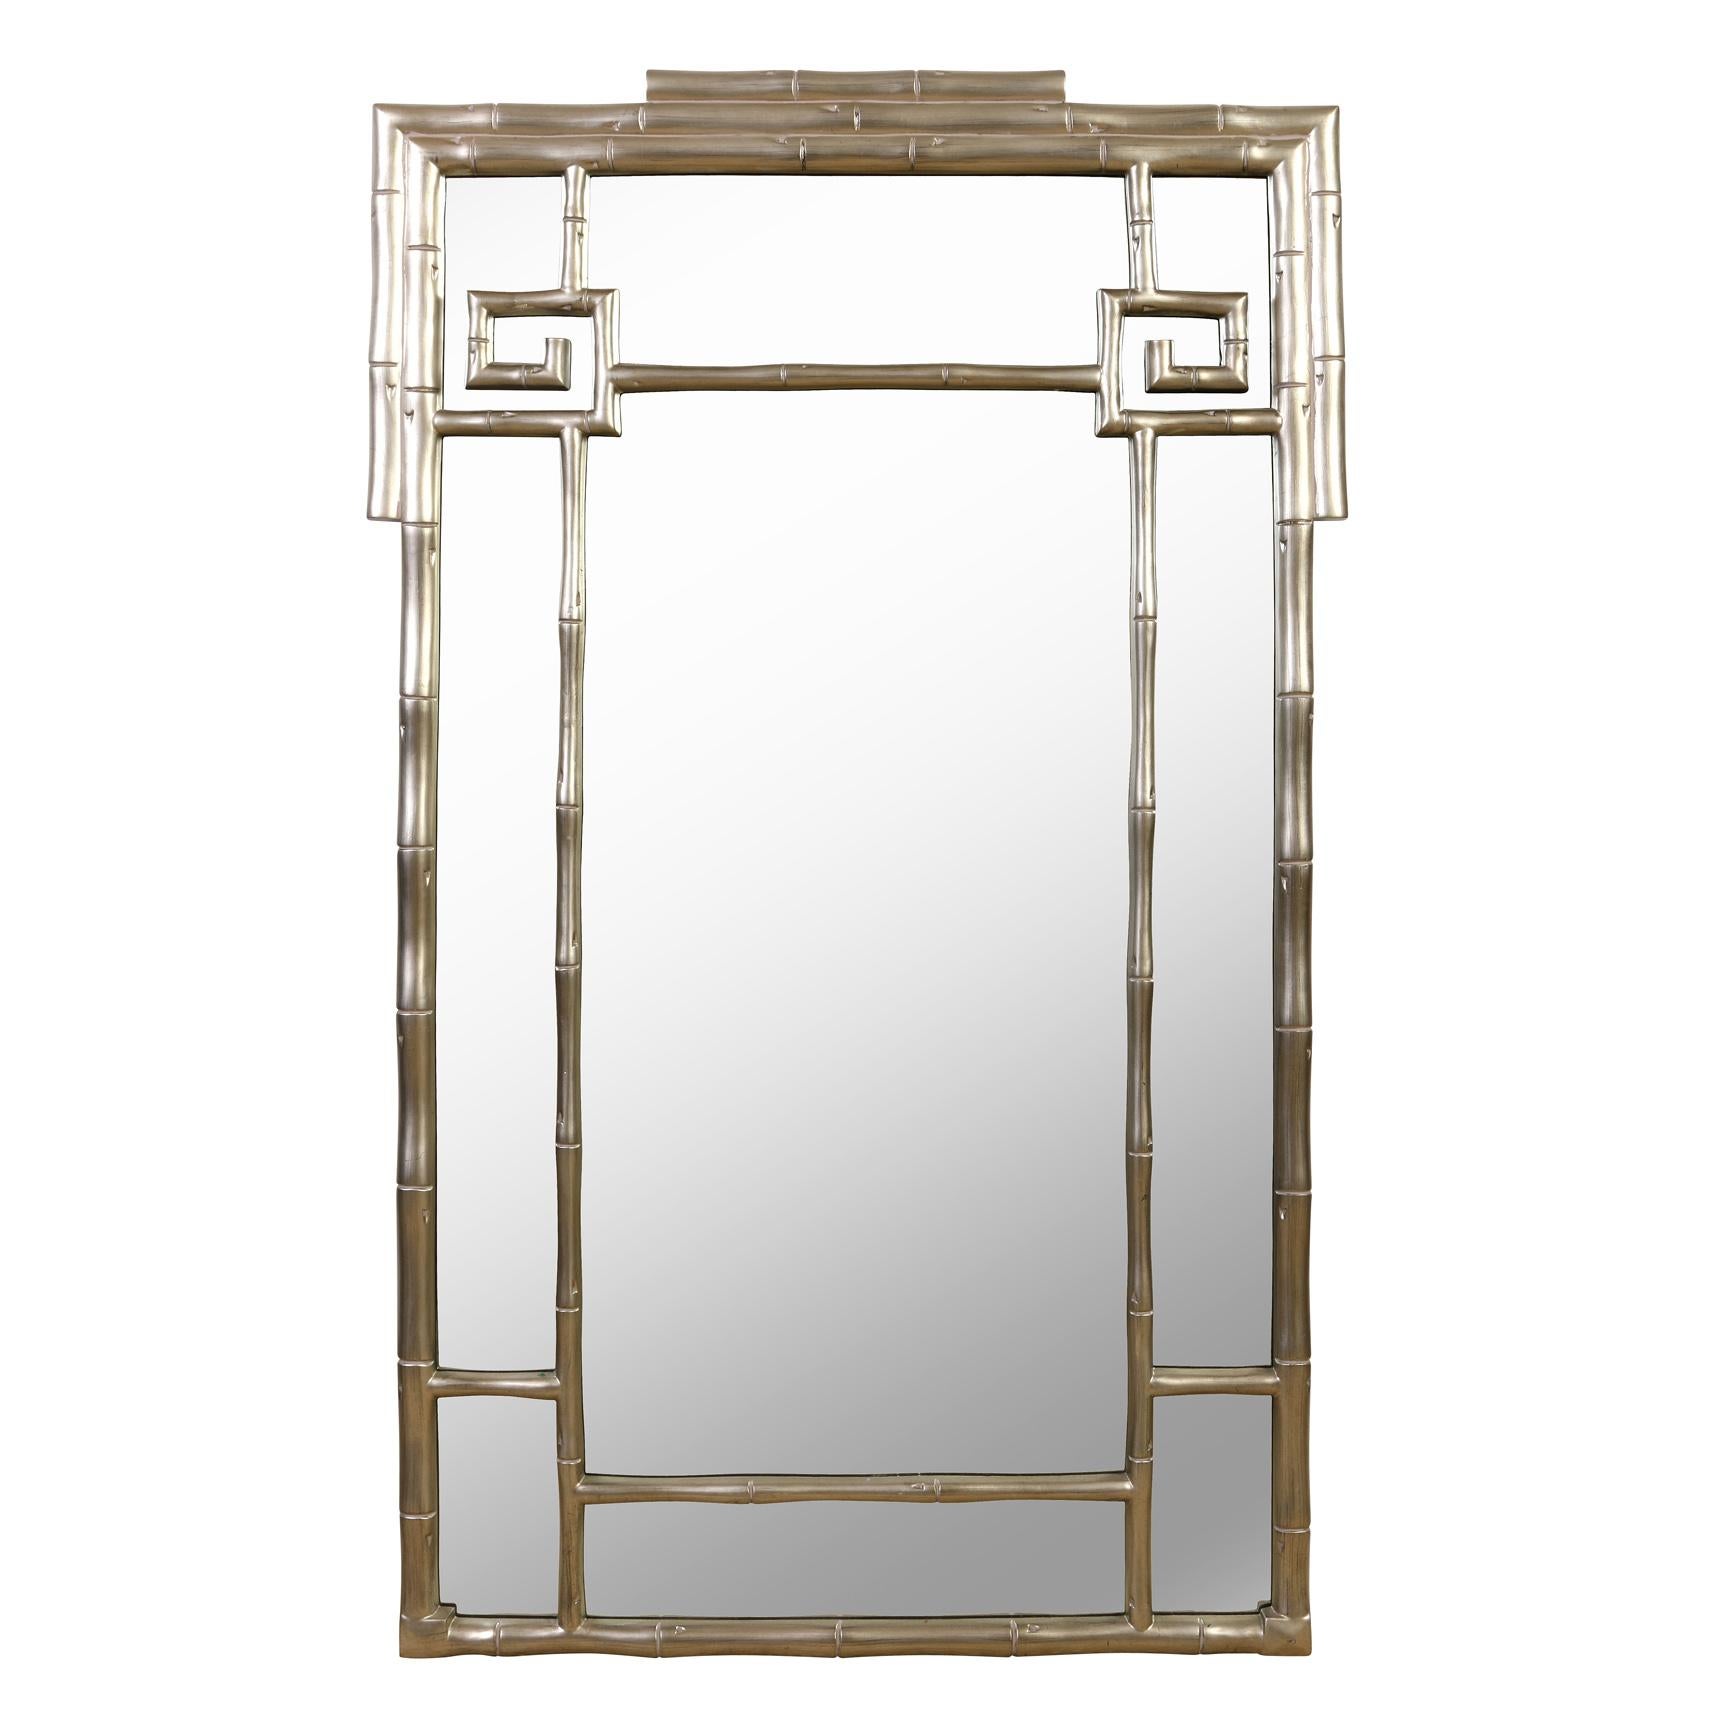 A large silver leaf mirror with bamboo motif frame.